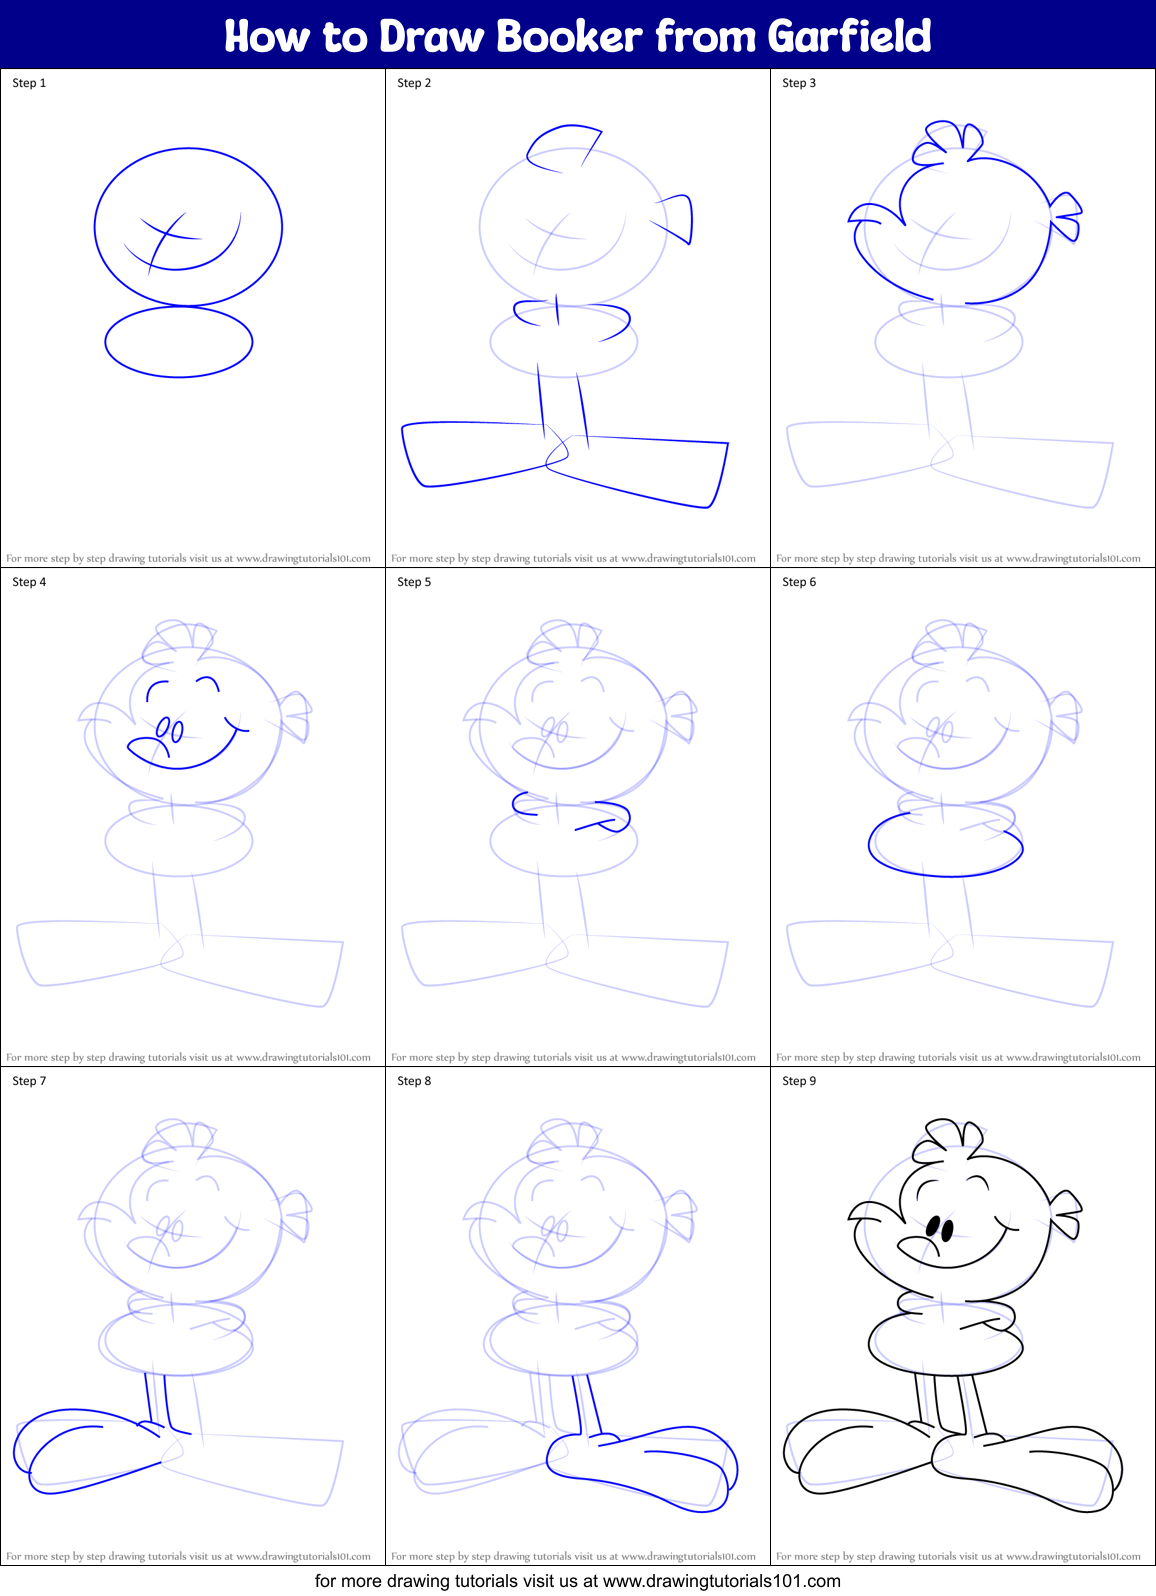 How to Draw Booker from Garfield printable step by step drawing sheet ...